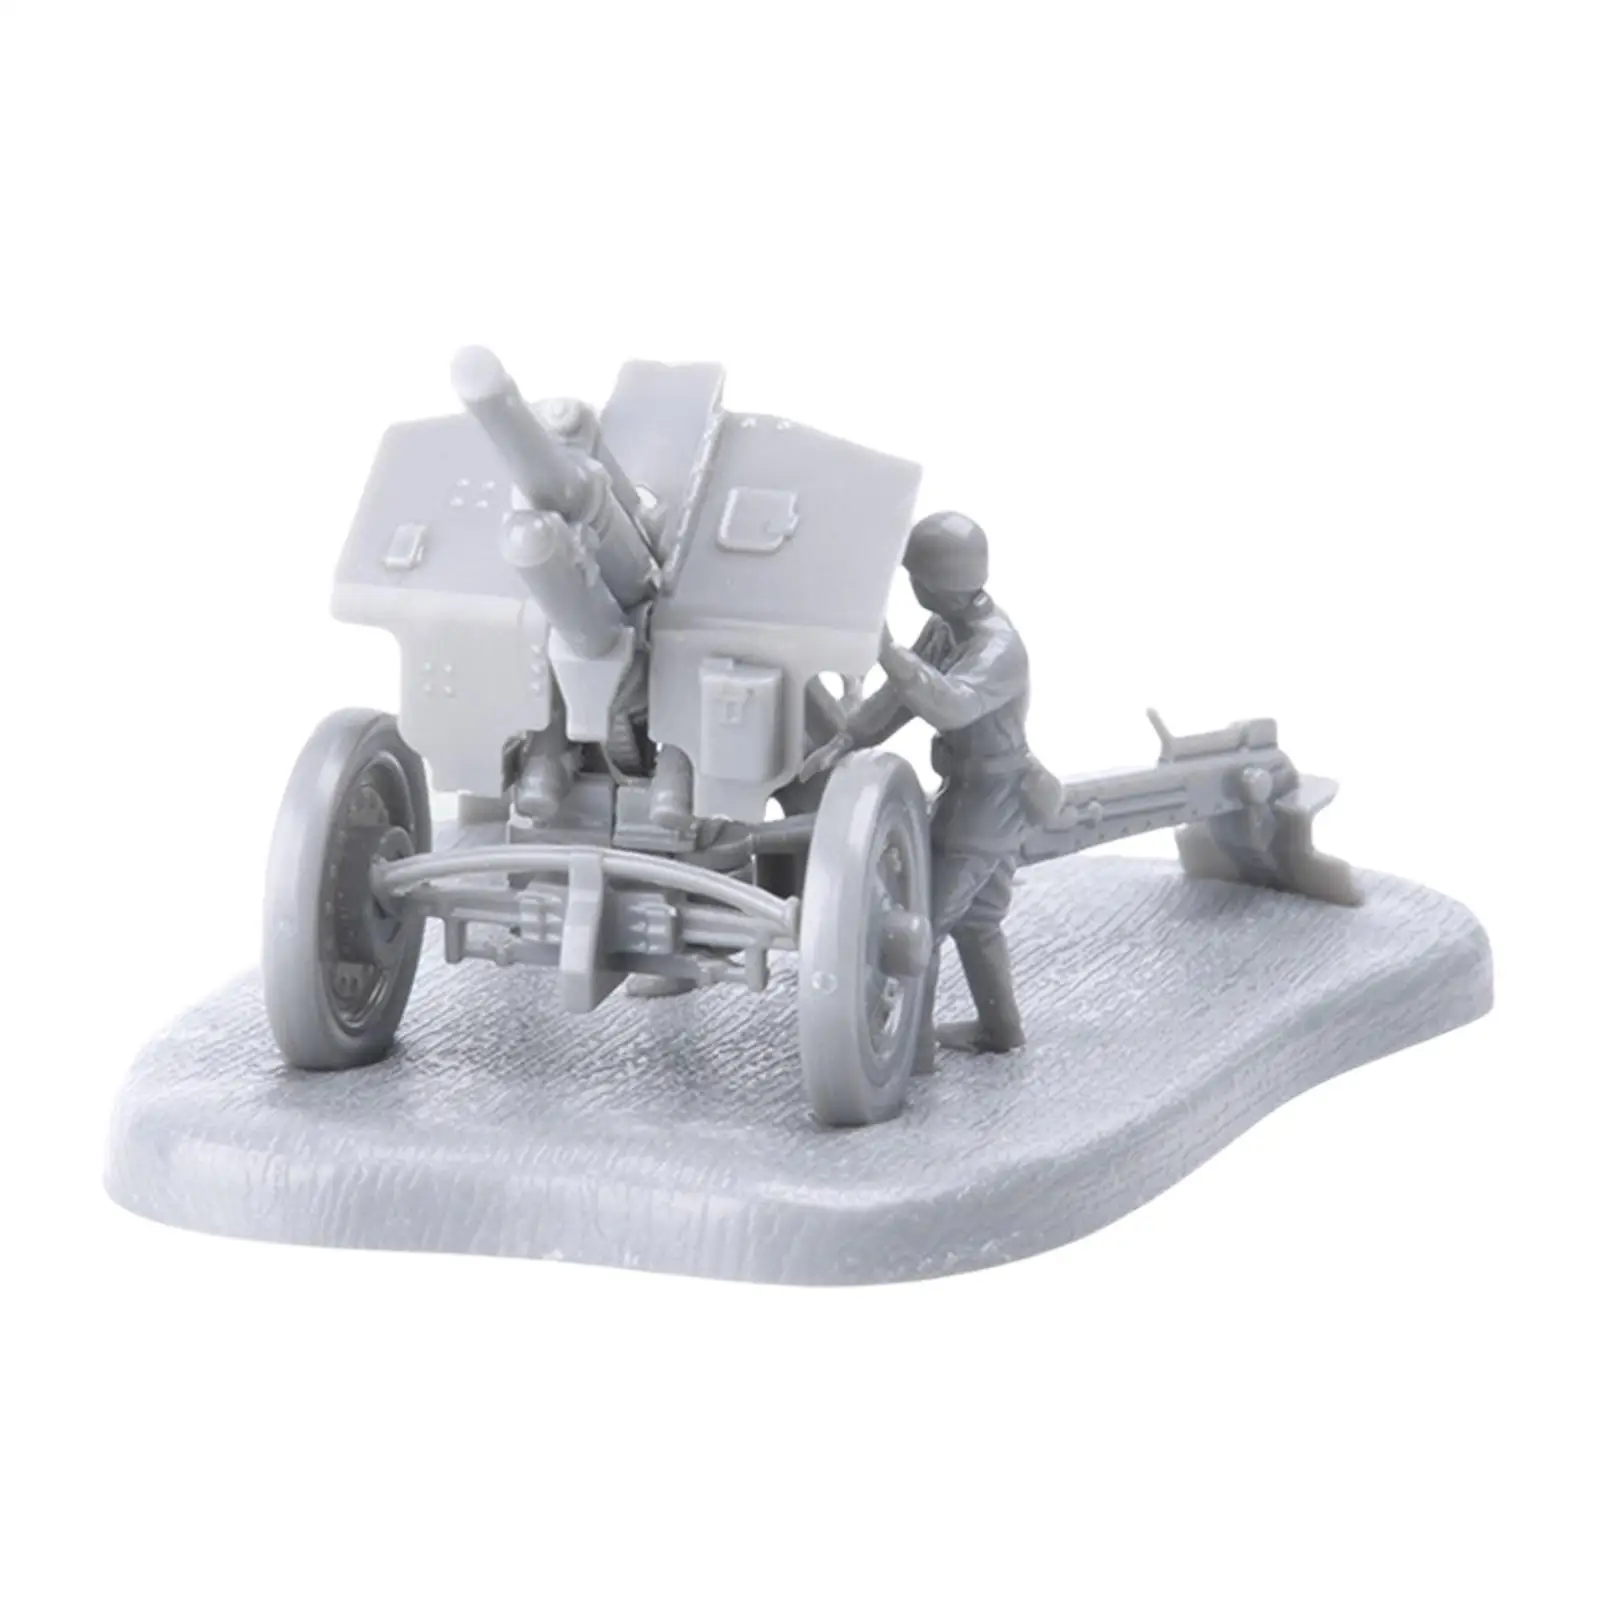 Wwii 1:72 Scenario M1938 Cannon Assembly Model Toy Surprise Gifts Holiday Gifts DIY